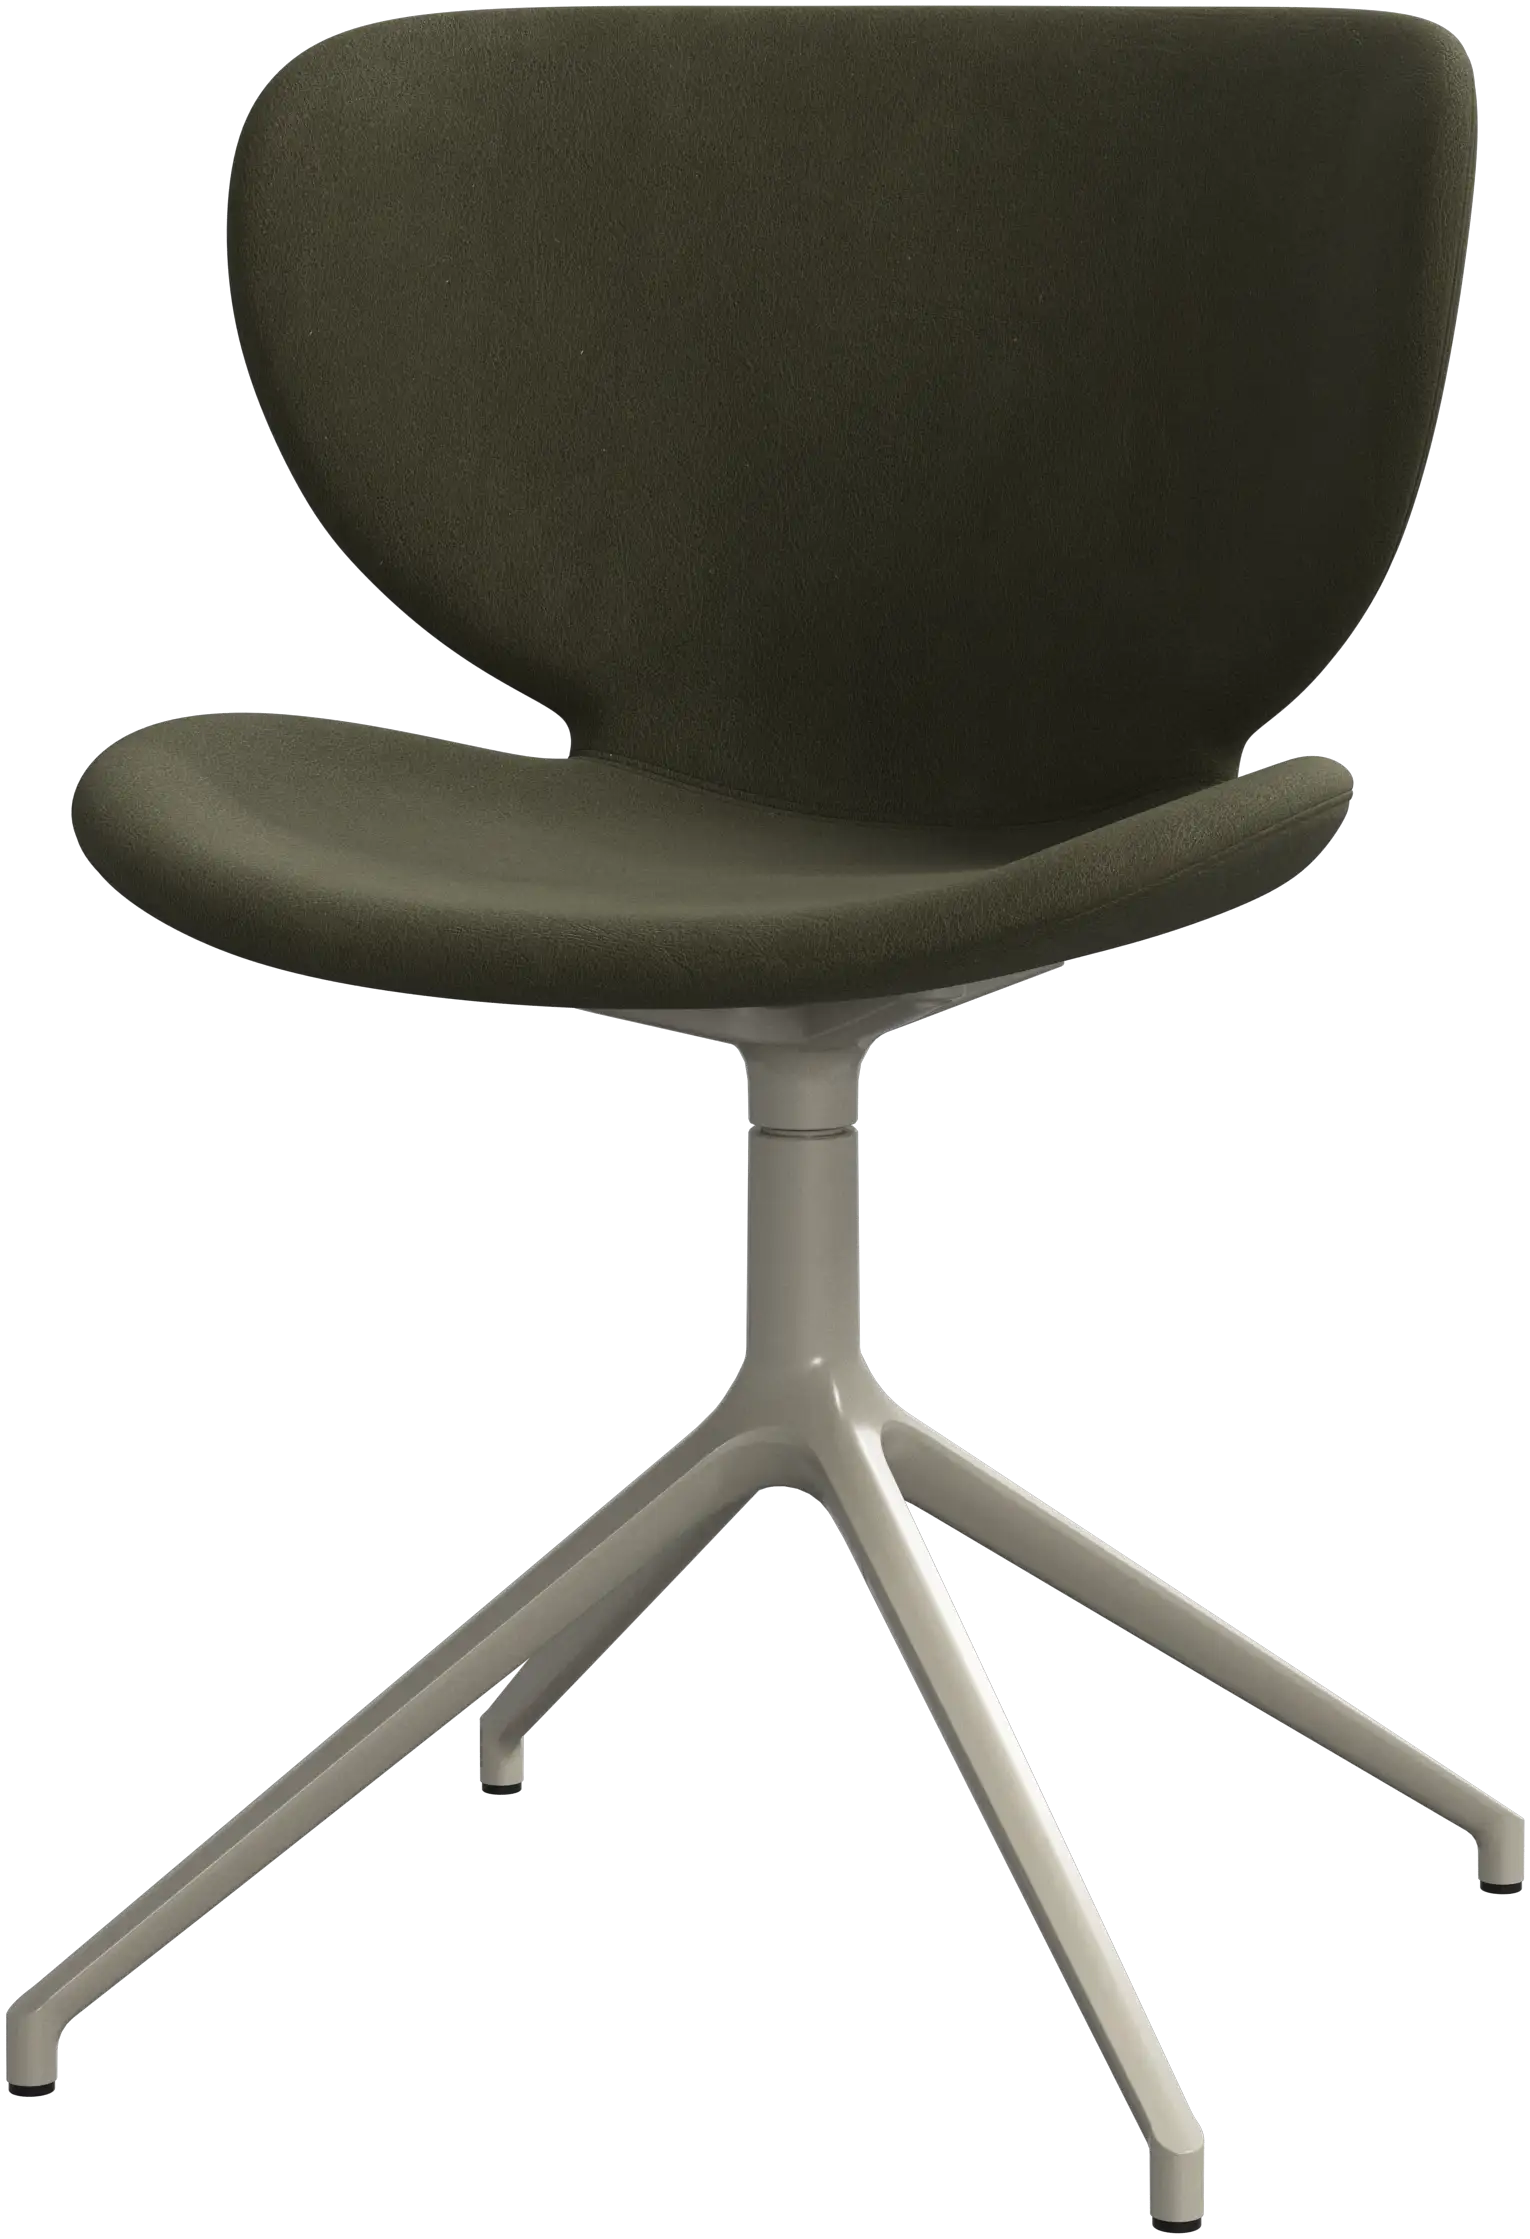 Hamilton chair with swivel function